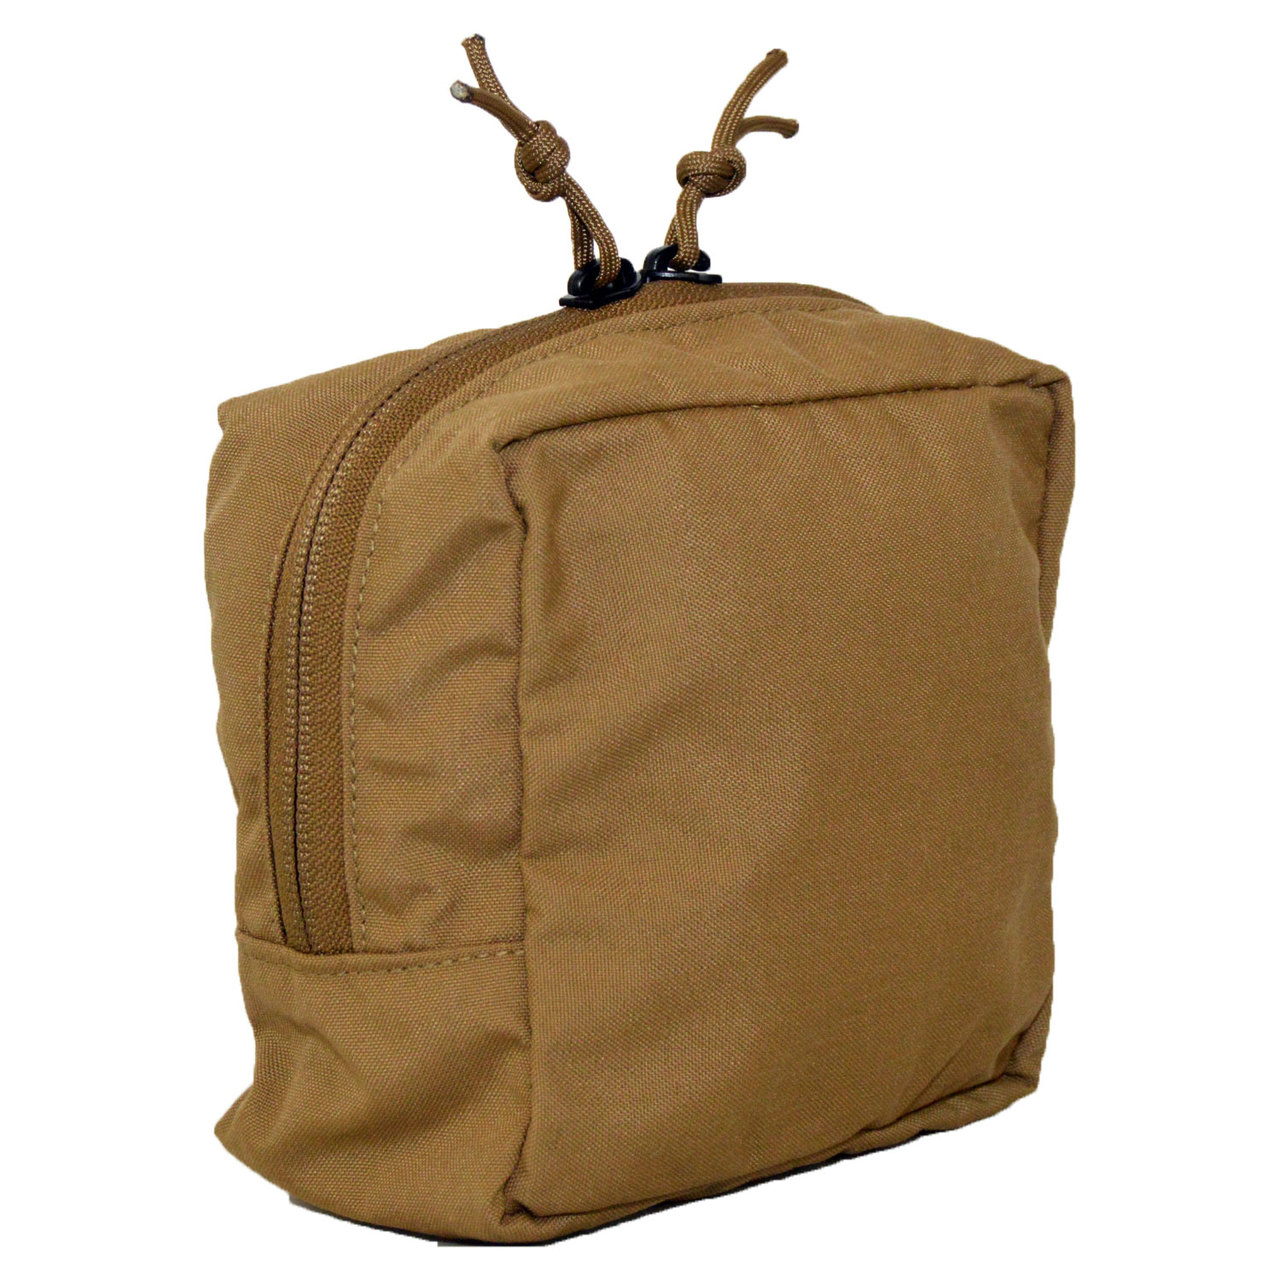 ATS Tactical Gear Slimline 6X6 Utility Pouch in Coyote Brown